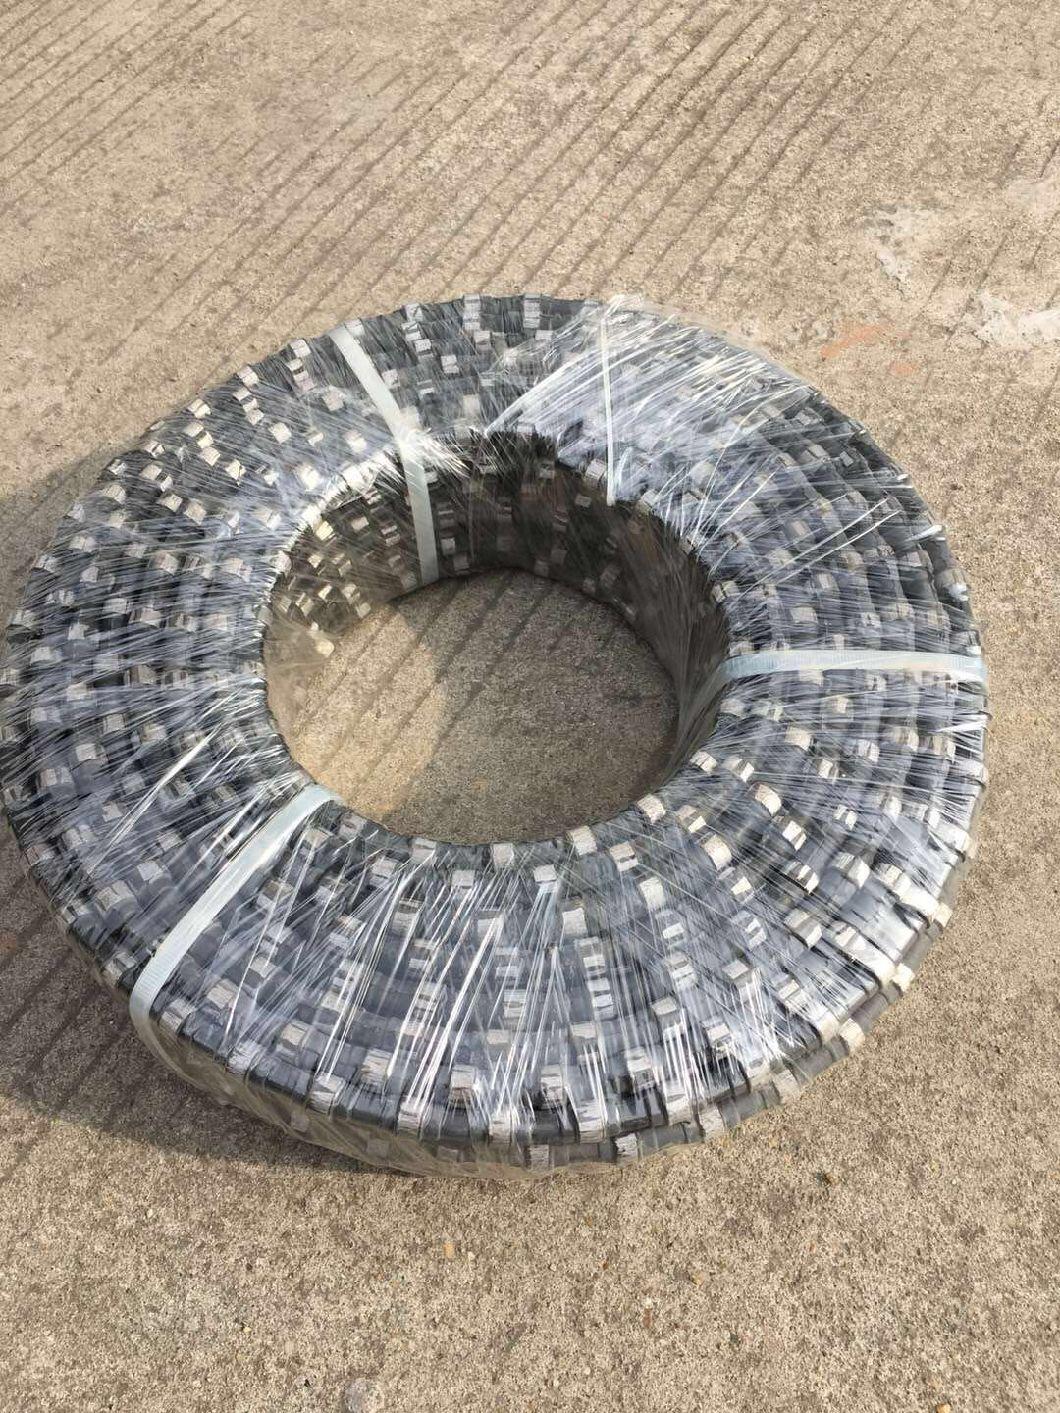 Diamond Spring Wire Saw Rope Cutting Stone Diamond Wire Saw for Granite Marble